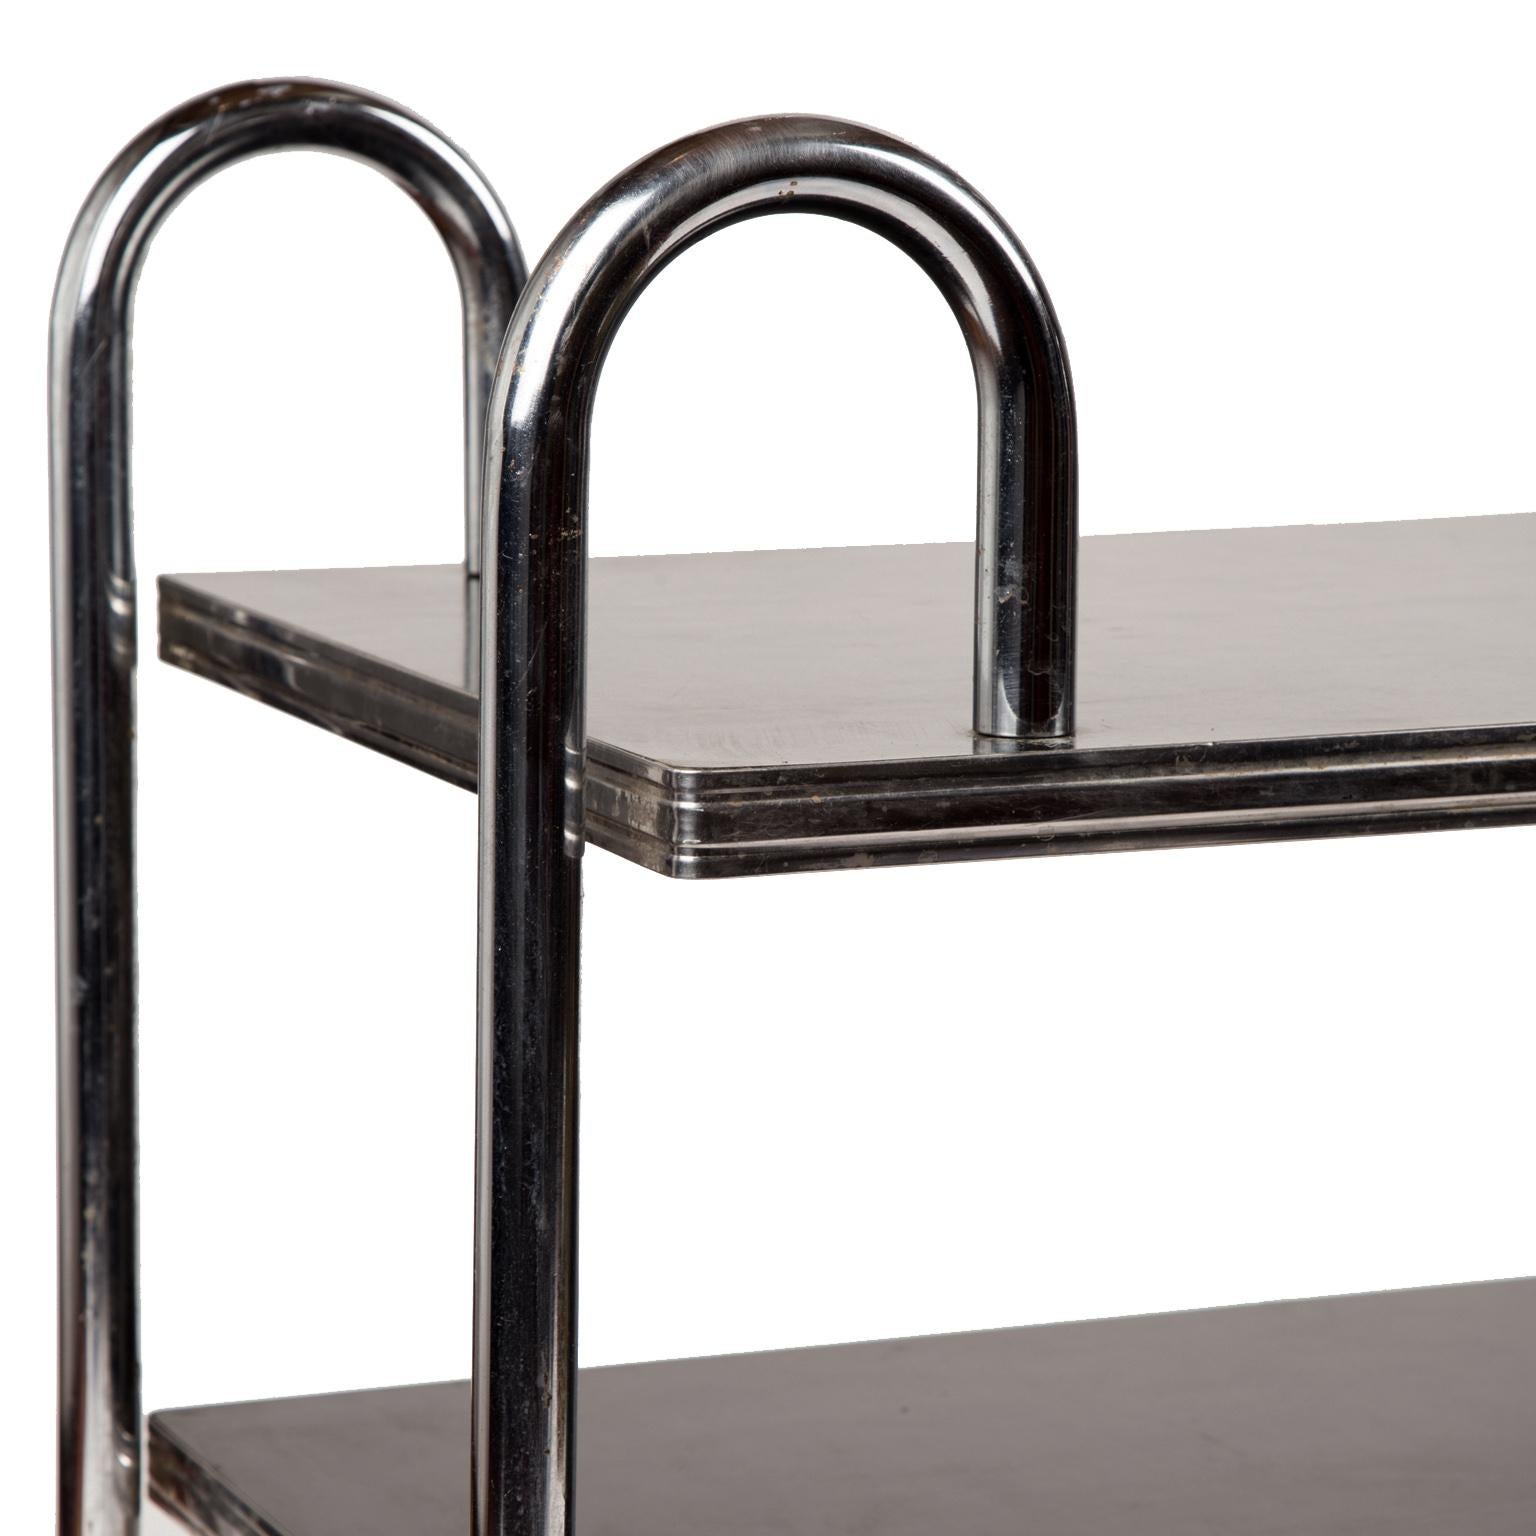 American Machine Age Art Deco Chrome Table by Doehler furniture in the manner of Rohde